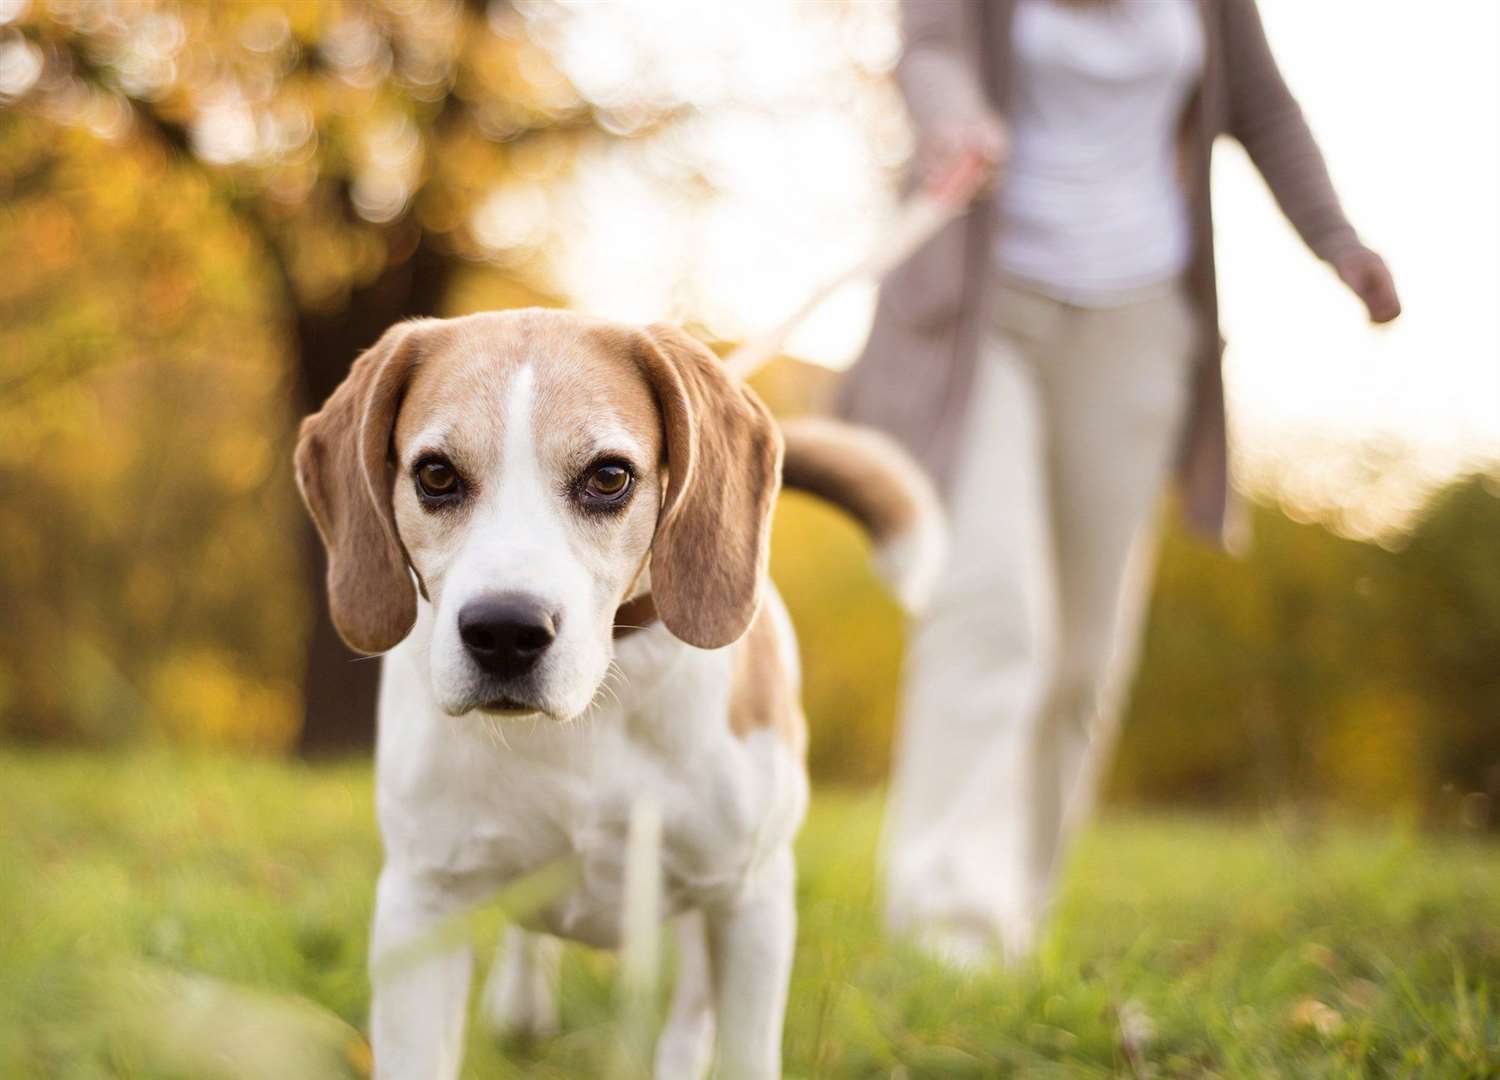 Beagles need a lot of activity to keep them out of trouble. Image: iStock.